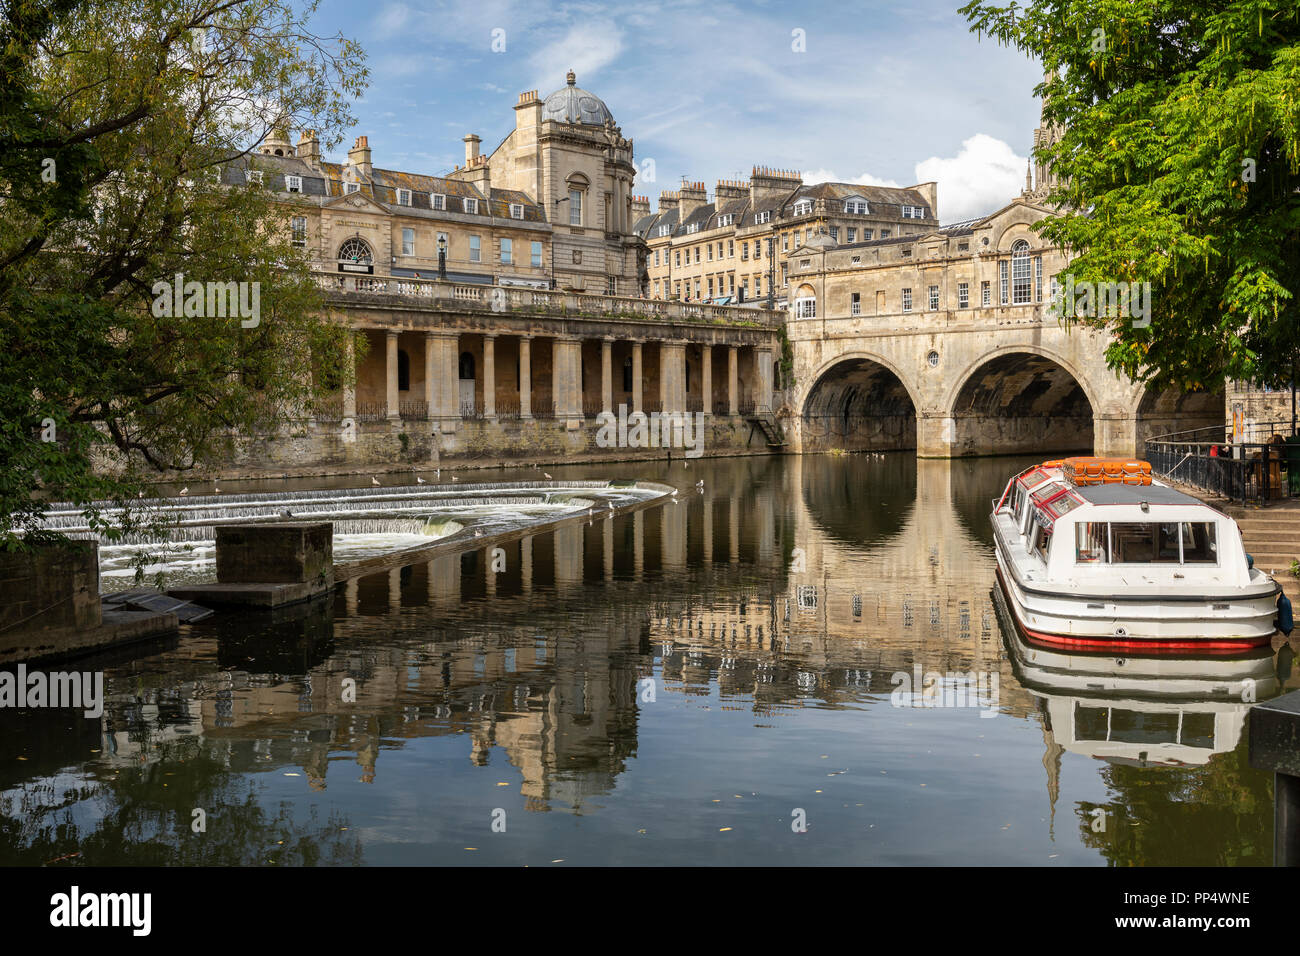 Pulteney Bridge and weir, Grand Parade and riverside vaults all seen with reflections in the River Avon, City of Bath, Somerset, England, UK Stock Photo